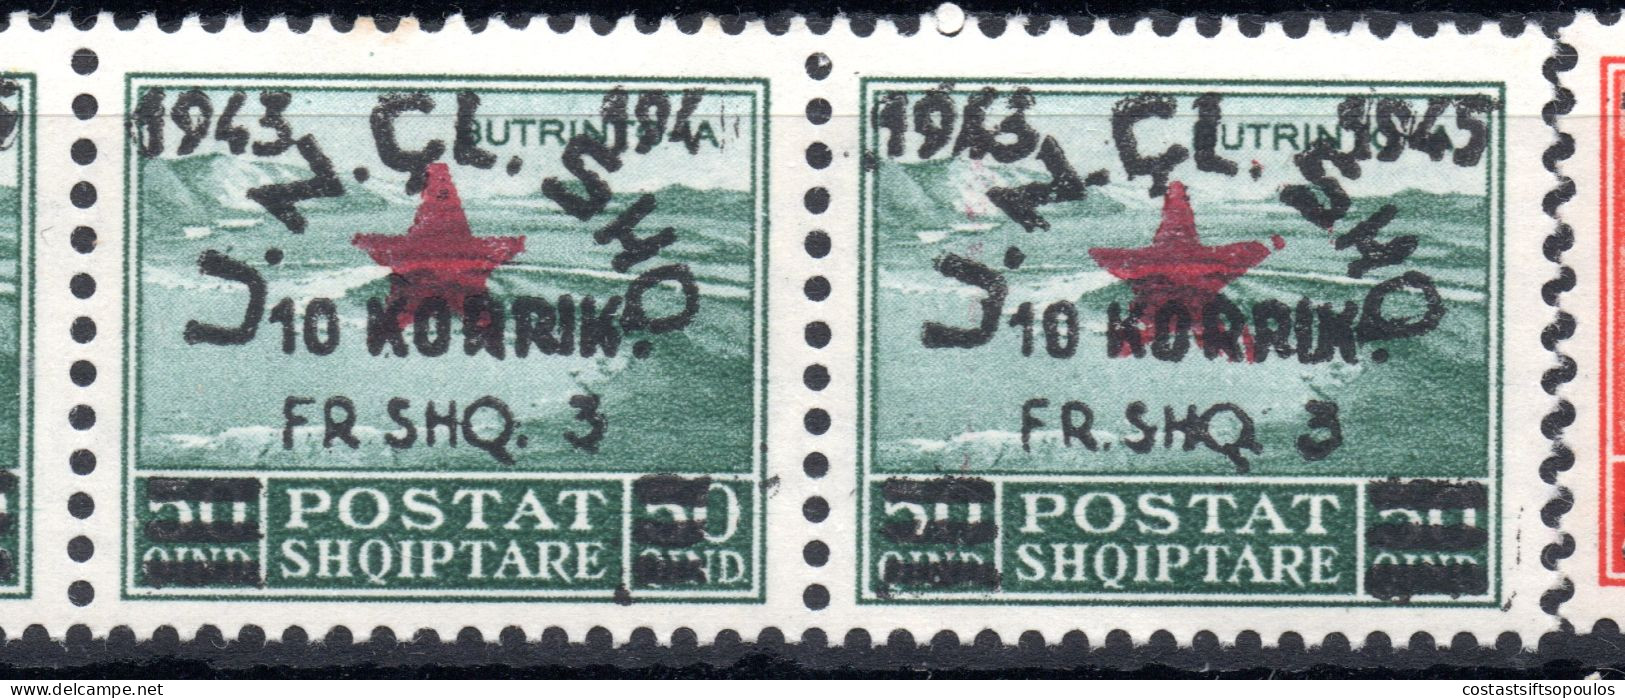 2936. ALBANIA 1945 ALBANIAN ARMY, MICH.368-374 MNH STRIPS OF 4. 1 X 373 194 INSTEAD OF 1945,SC. 354-360 - Albanië